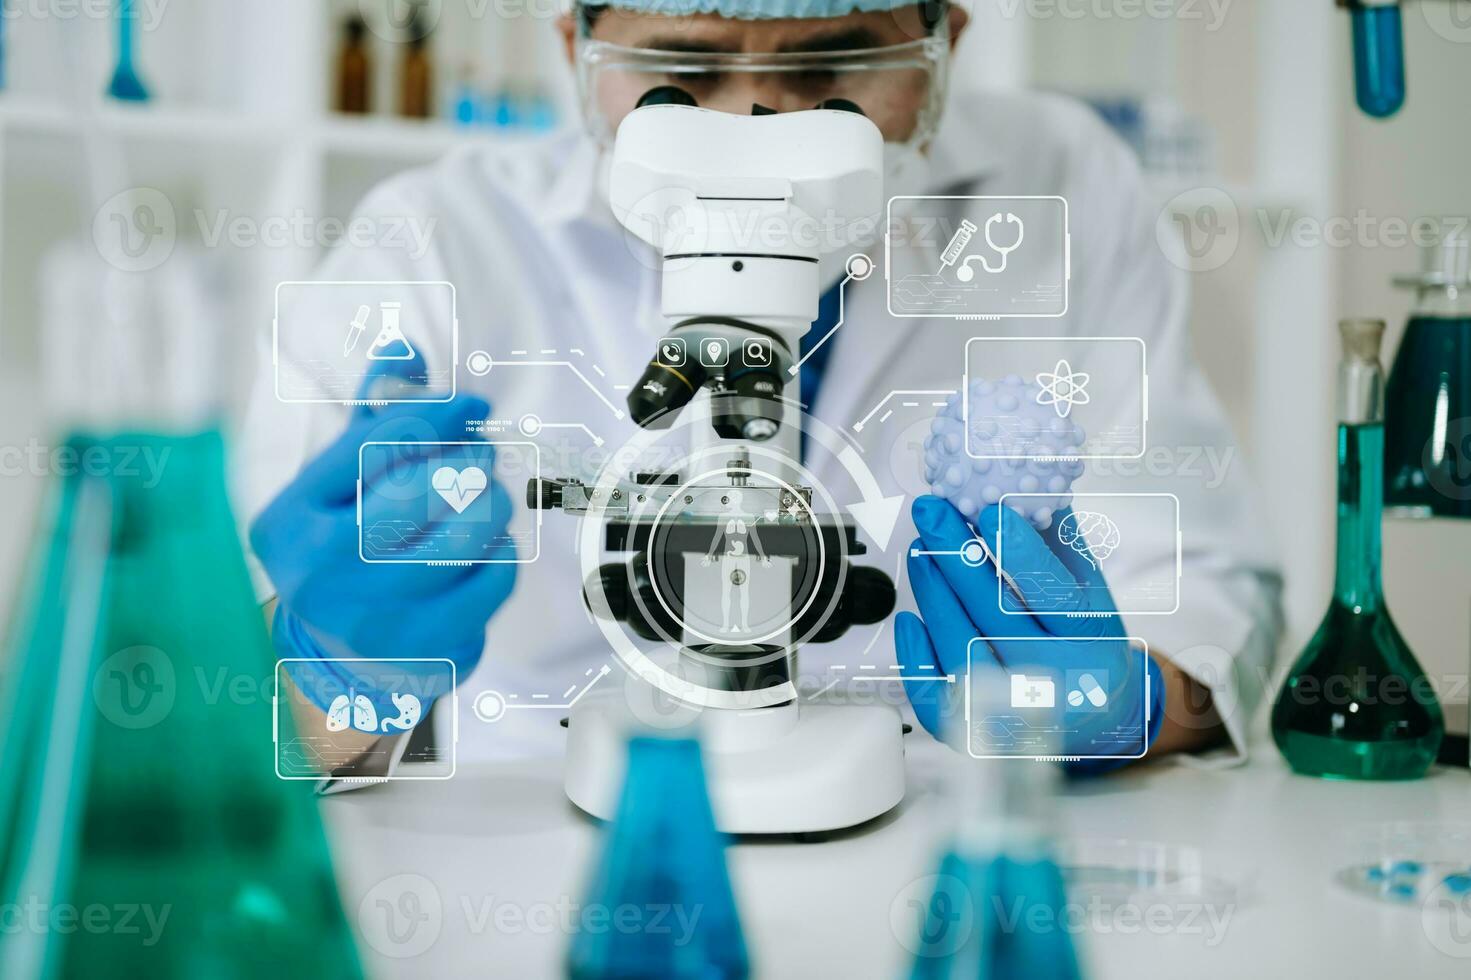 Male biotechnologist testing new chemical substances in a laboratory. photo